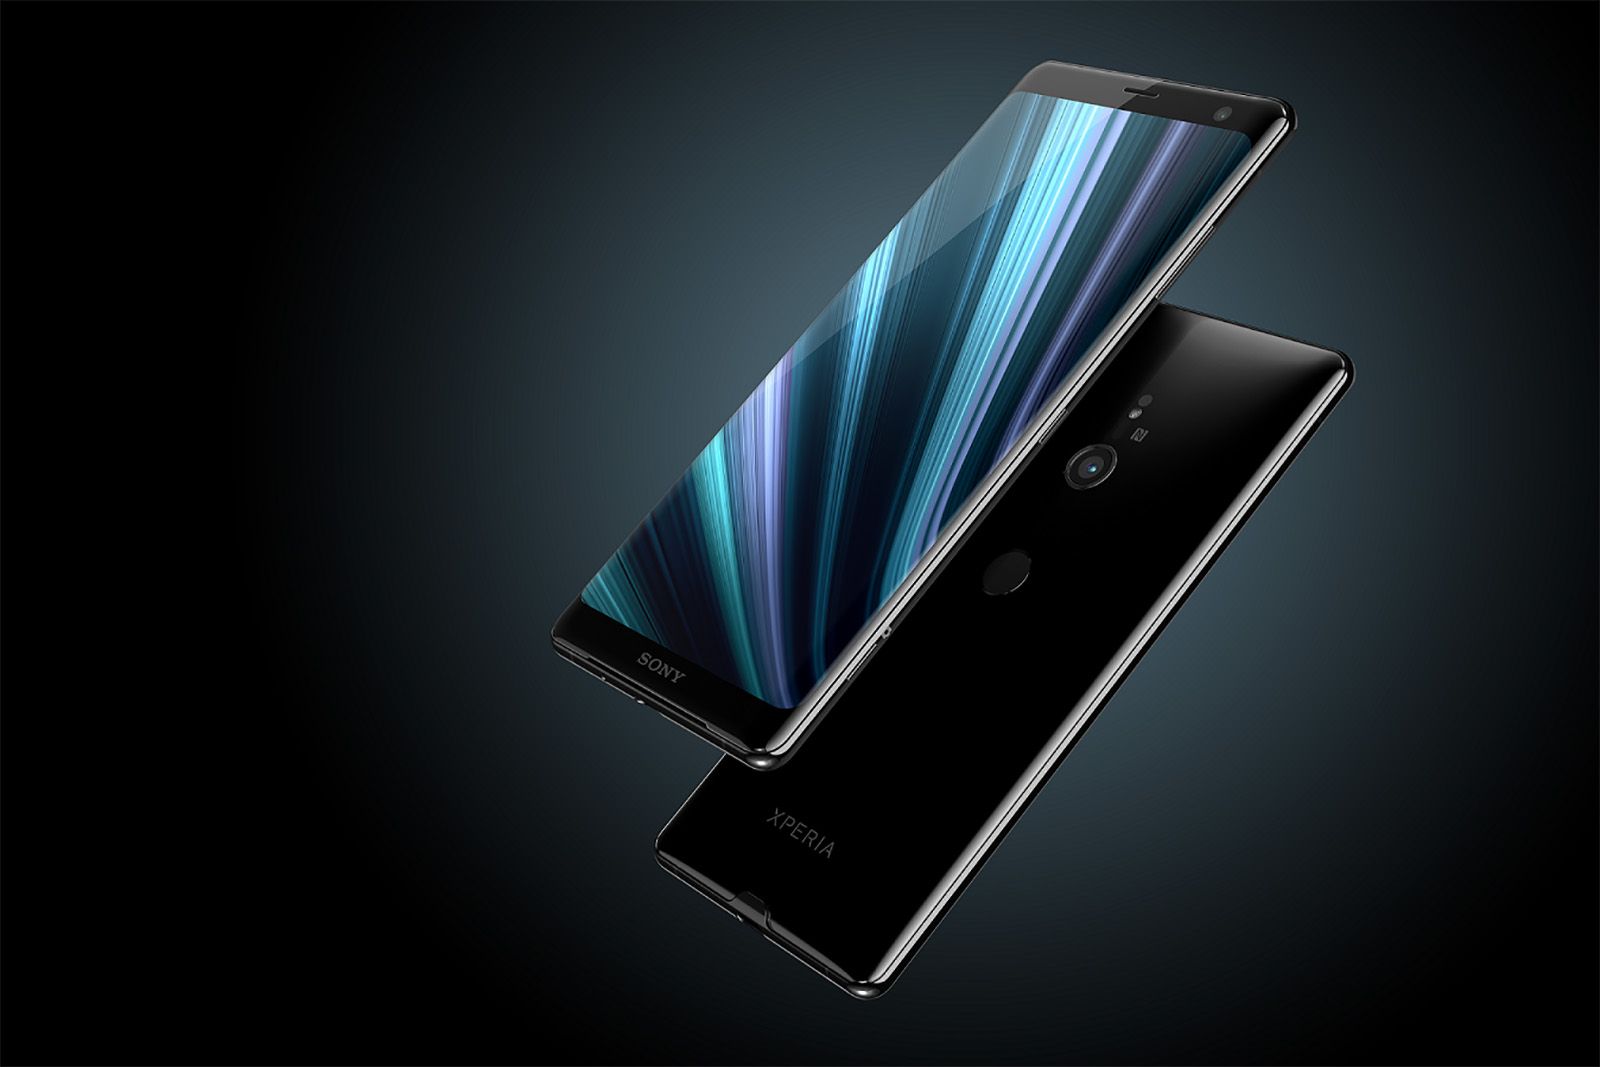 Sony Xperia XZ3 could be the best looking Sony phone yet image 1